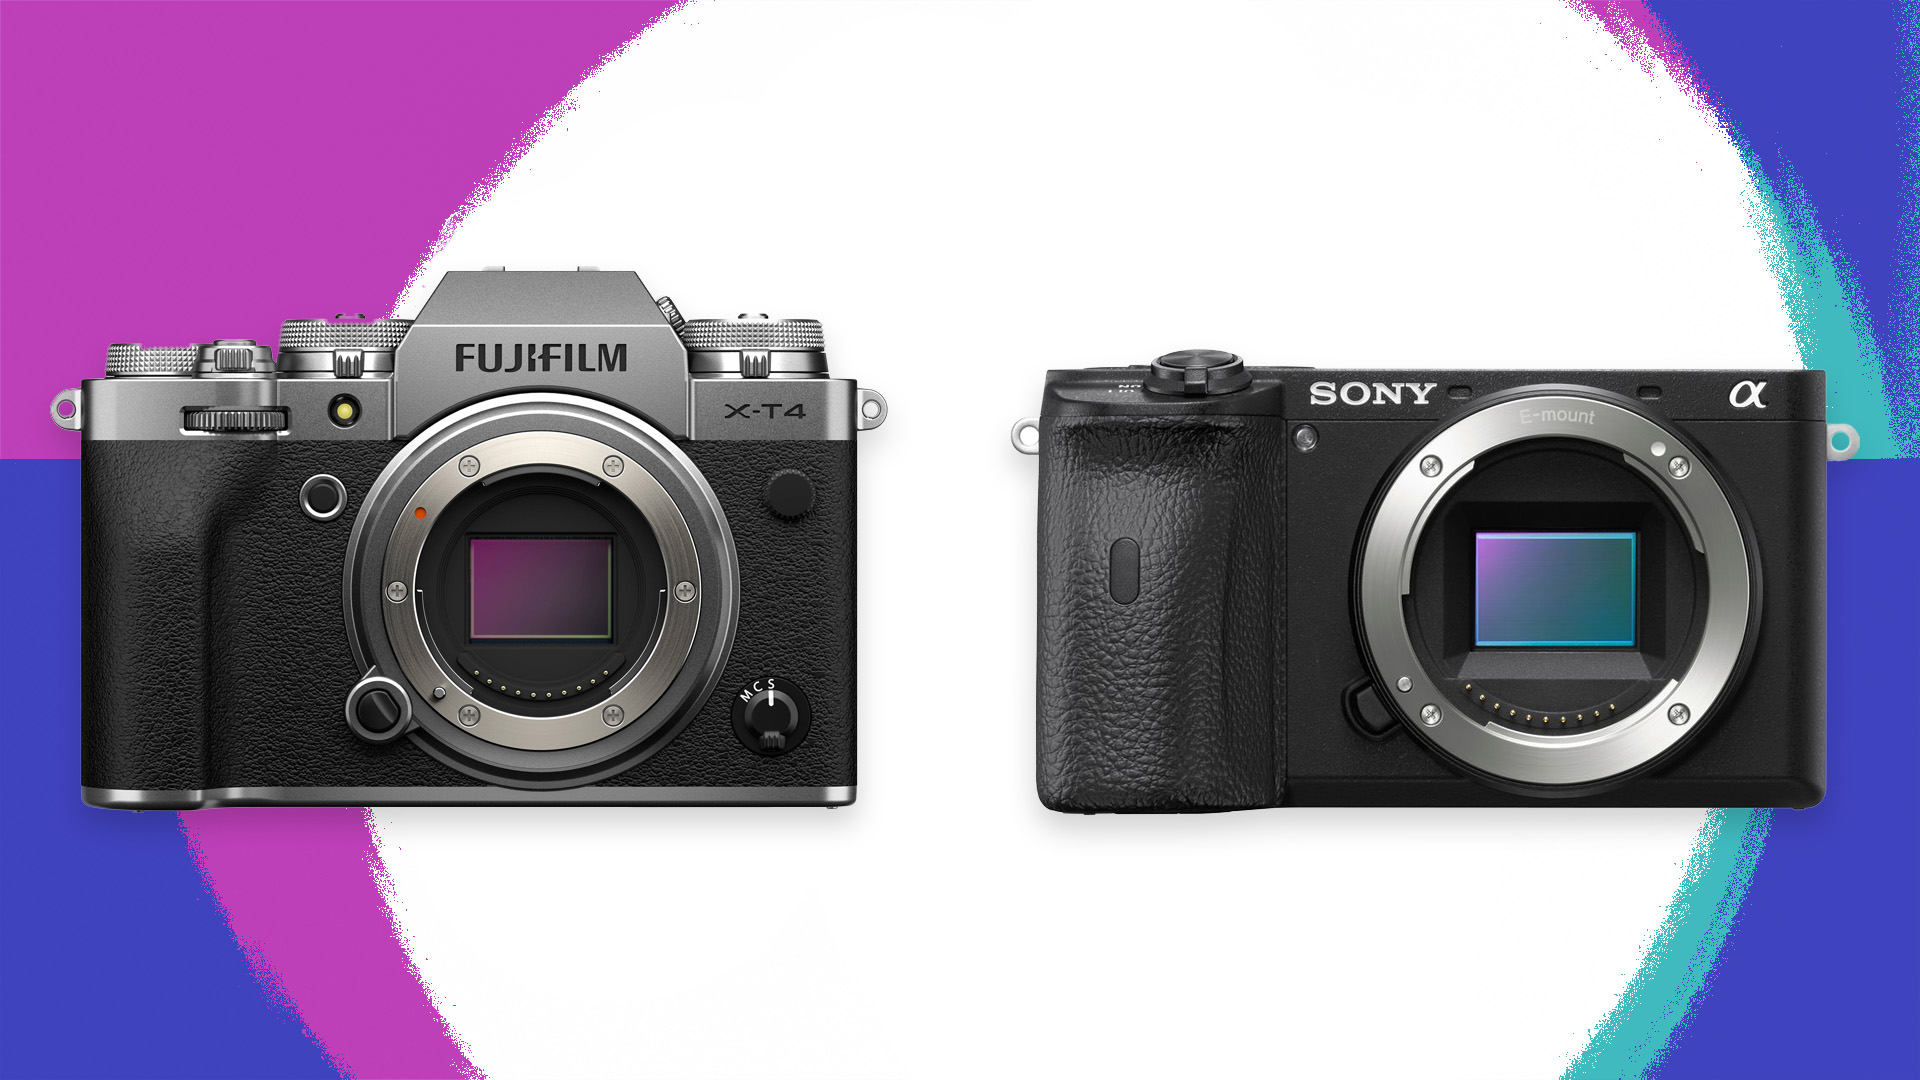 The Fujifilm X-T4 and Sony A6600, two of the Canon EOS R7's potential rivals